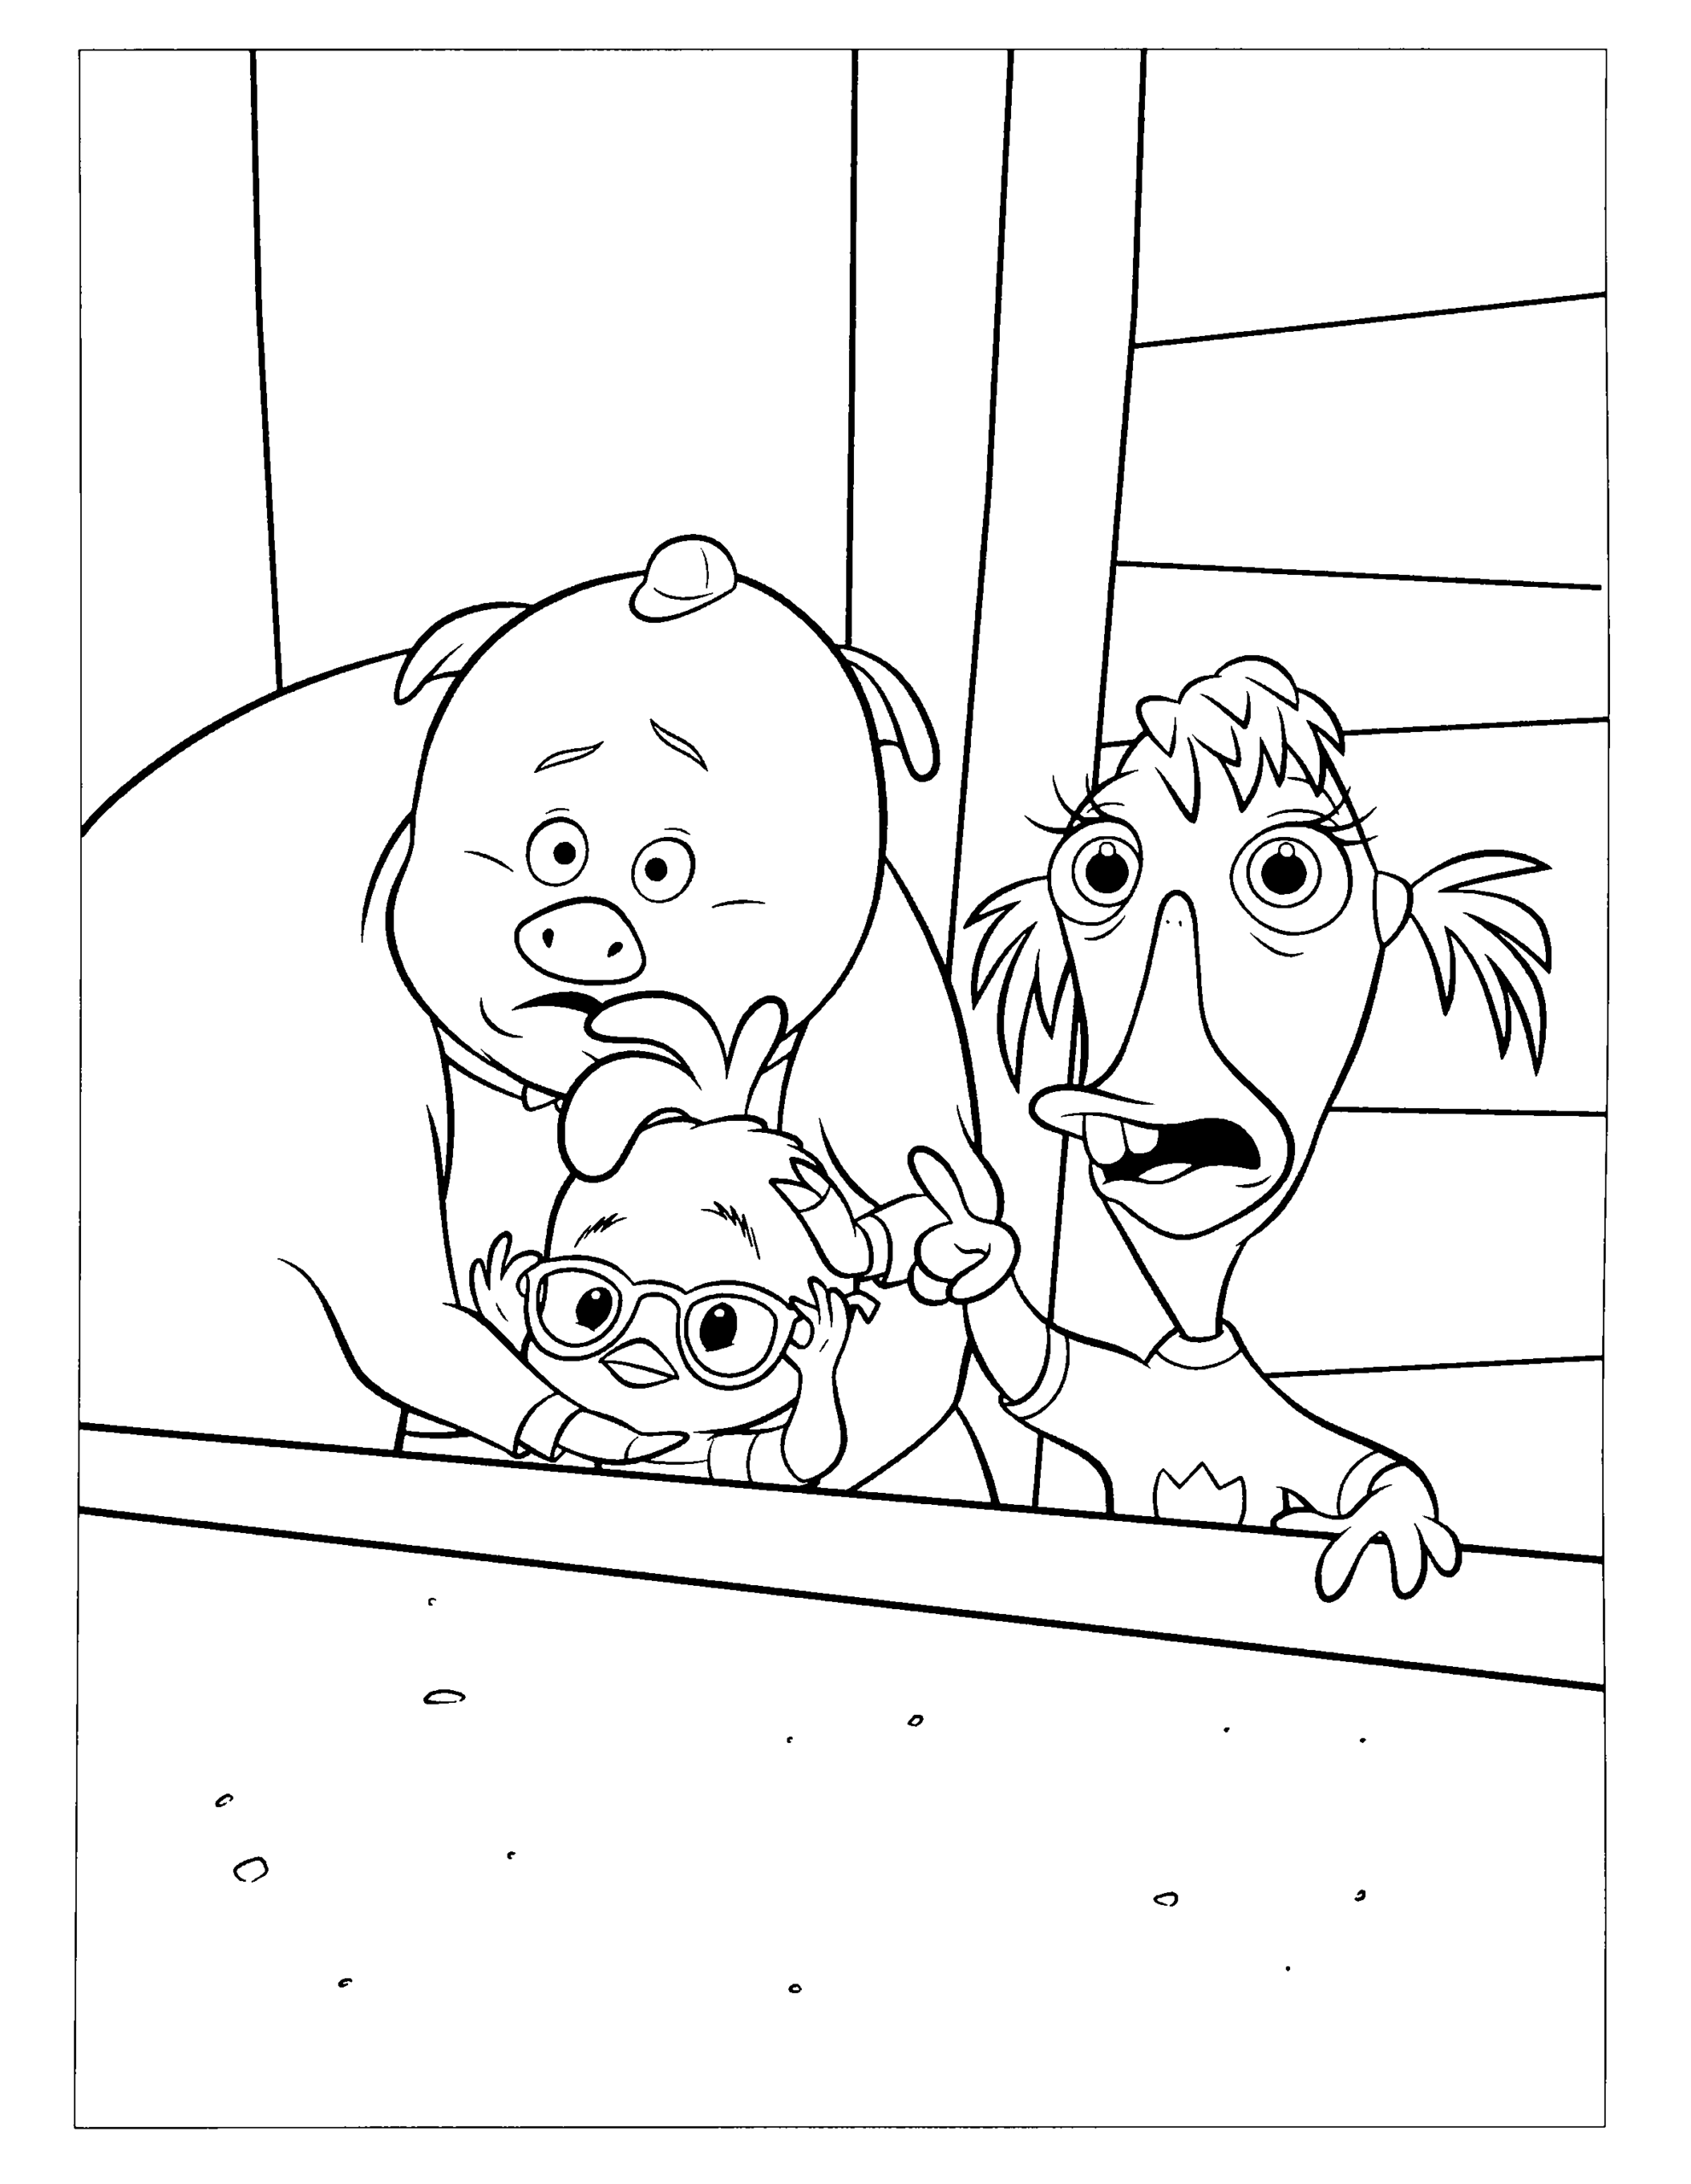 Chicken Little Coloring Pages TV Film chicken little 11 Printable 2020 02079 Coloring4free